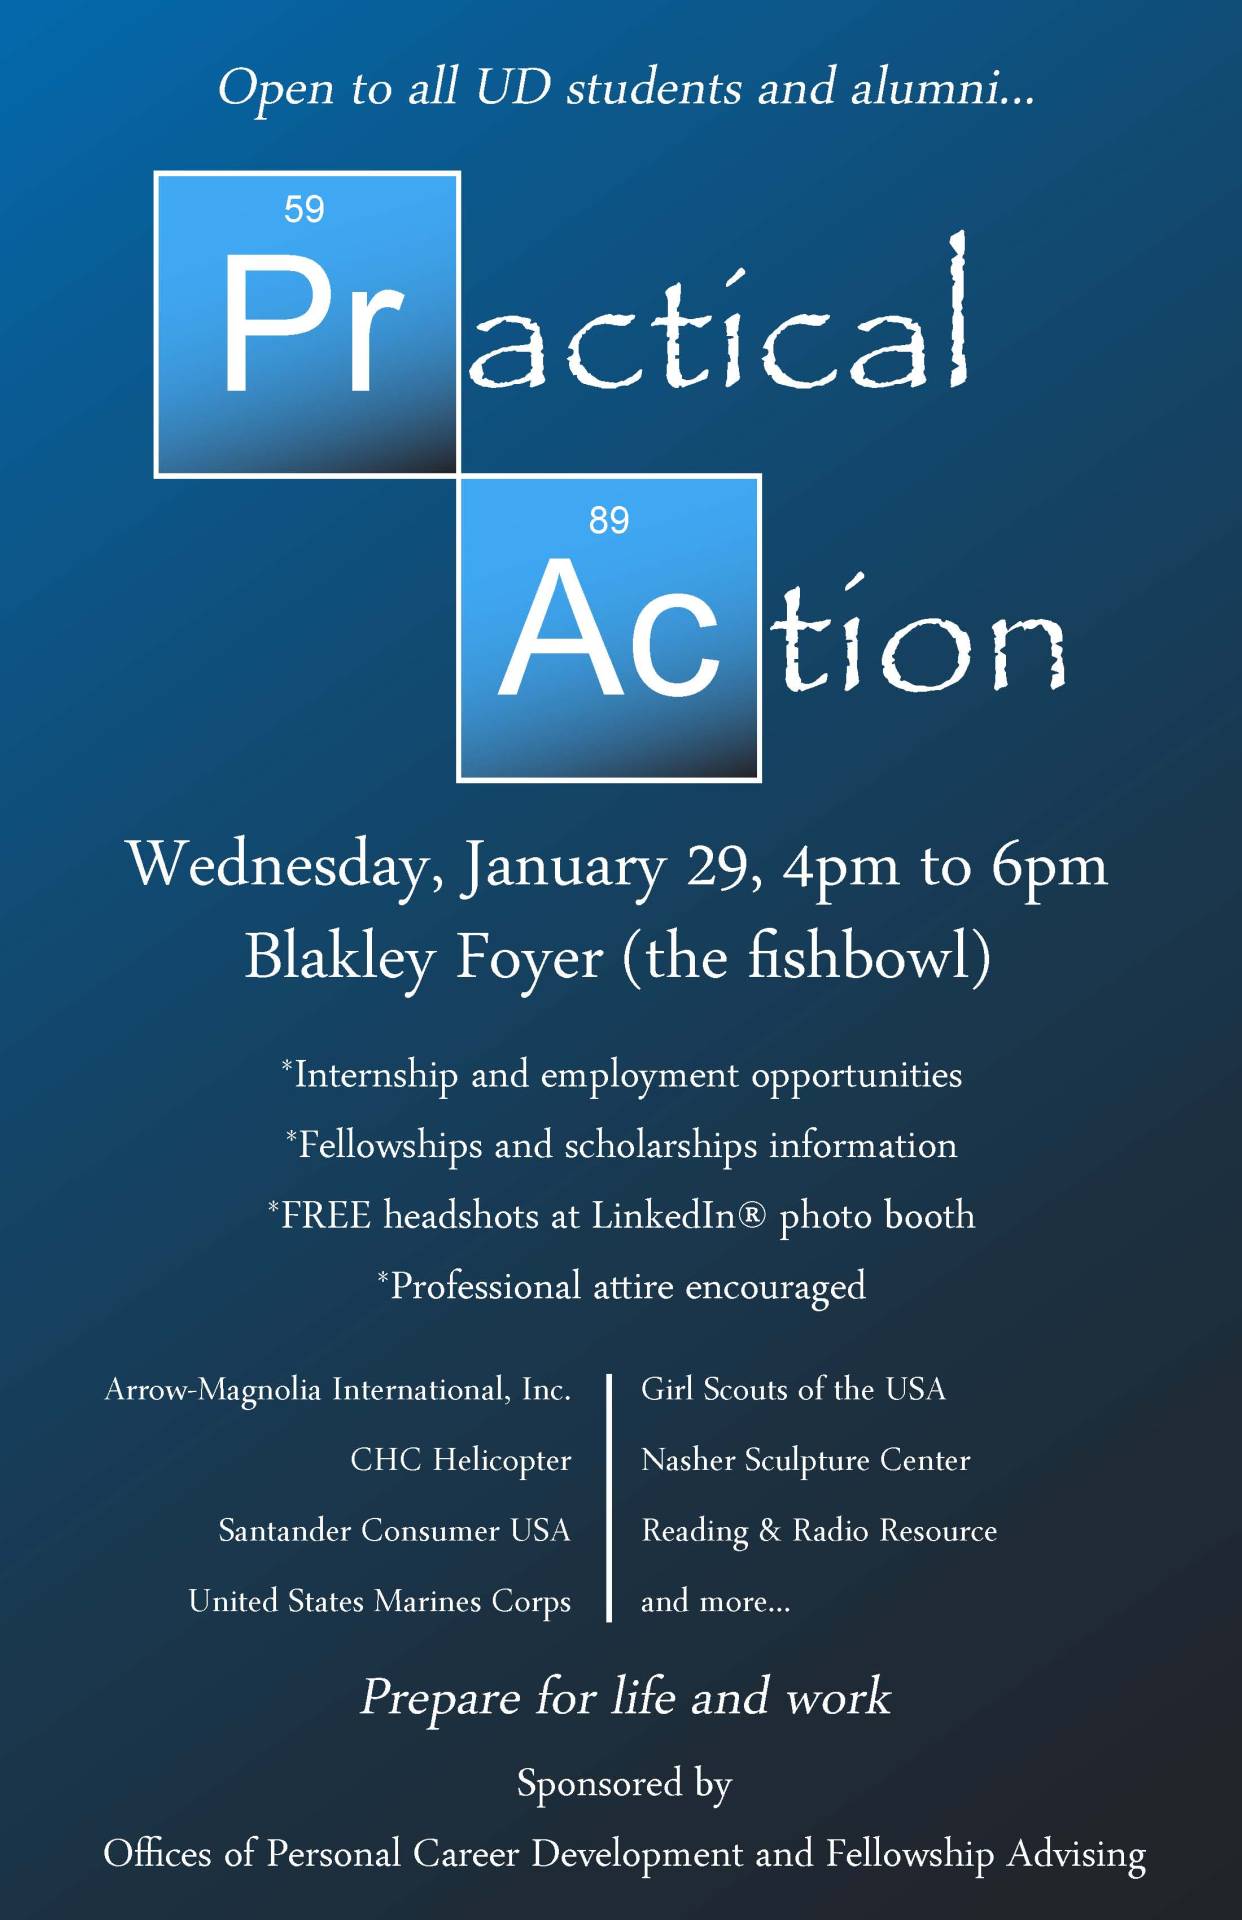 Kick off your semester with Practical Action! Wednesday, January 29th we’re partnering with the Office of Fellowship Advising to connect you with resources that will make a real and practical impact on your life after UD.
Join the conversation and...